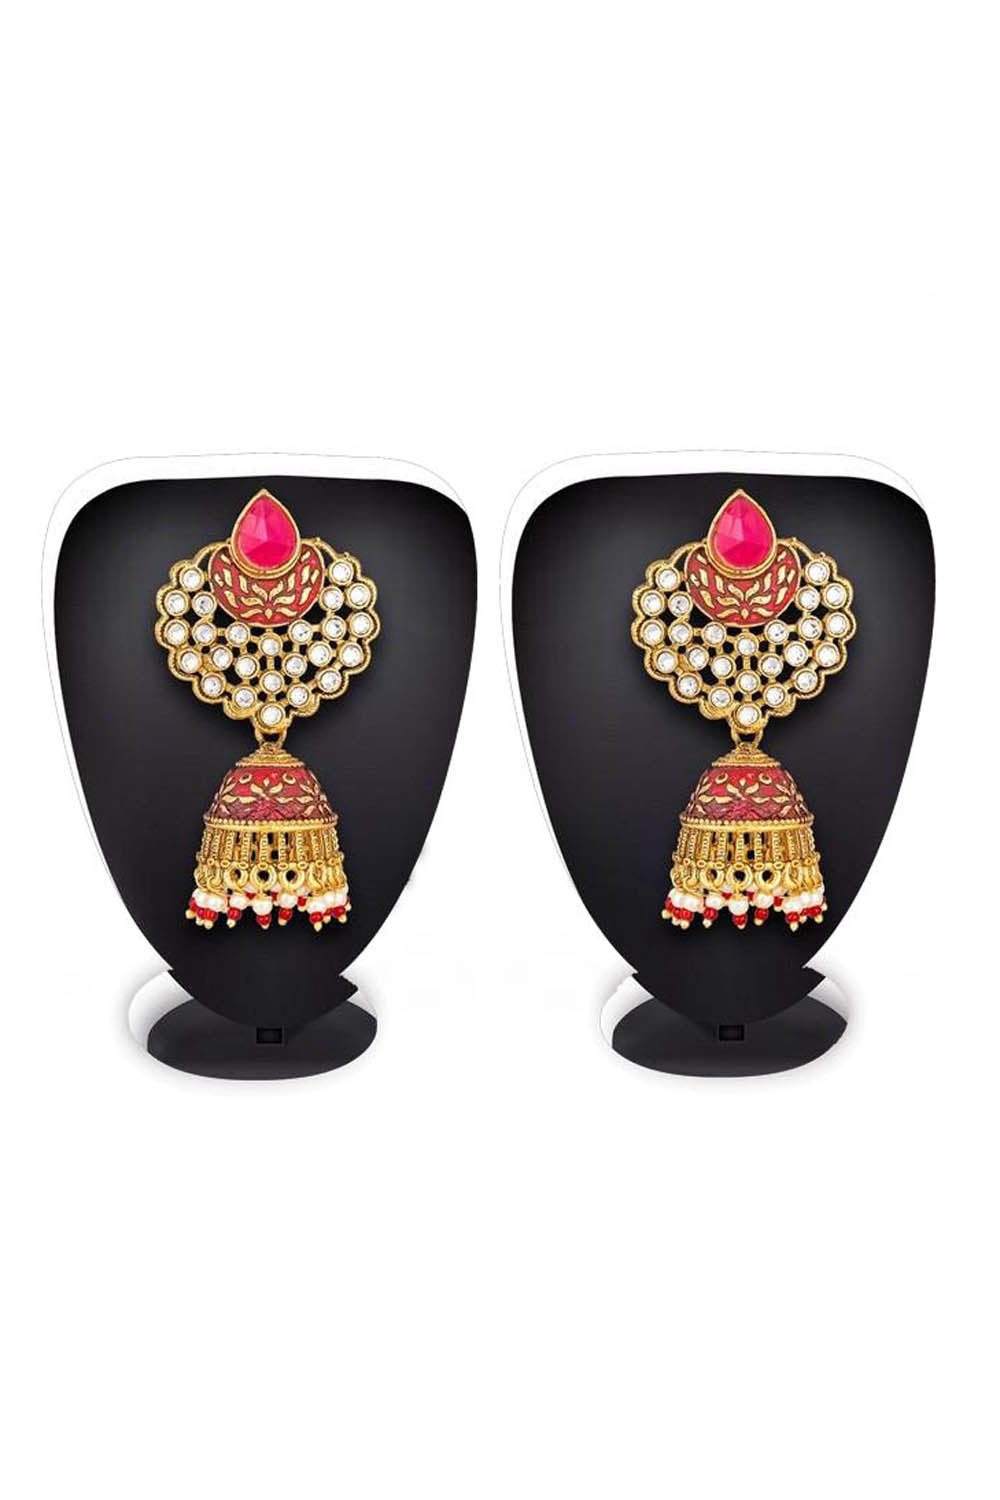 Women's Alloy Jhumka Earrings in Gold and Red